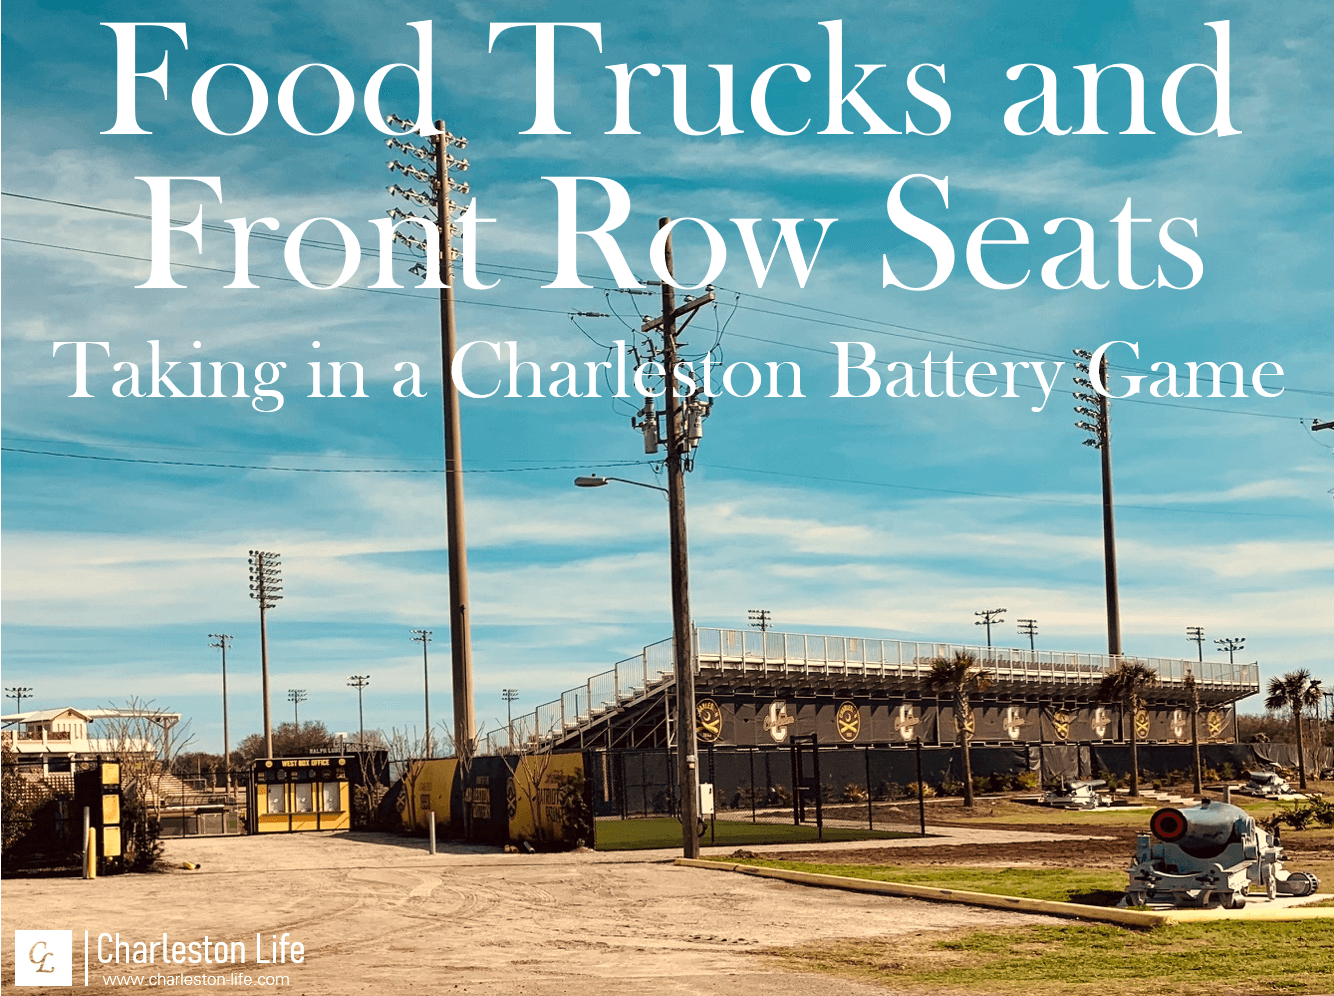 Food Trucks and Front Row Seats: Taking in a Charleston Battery Game at Patriots Point